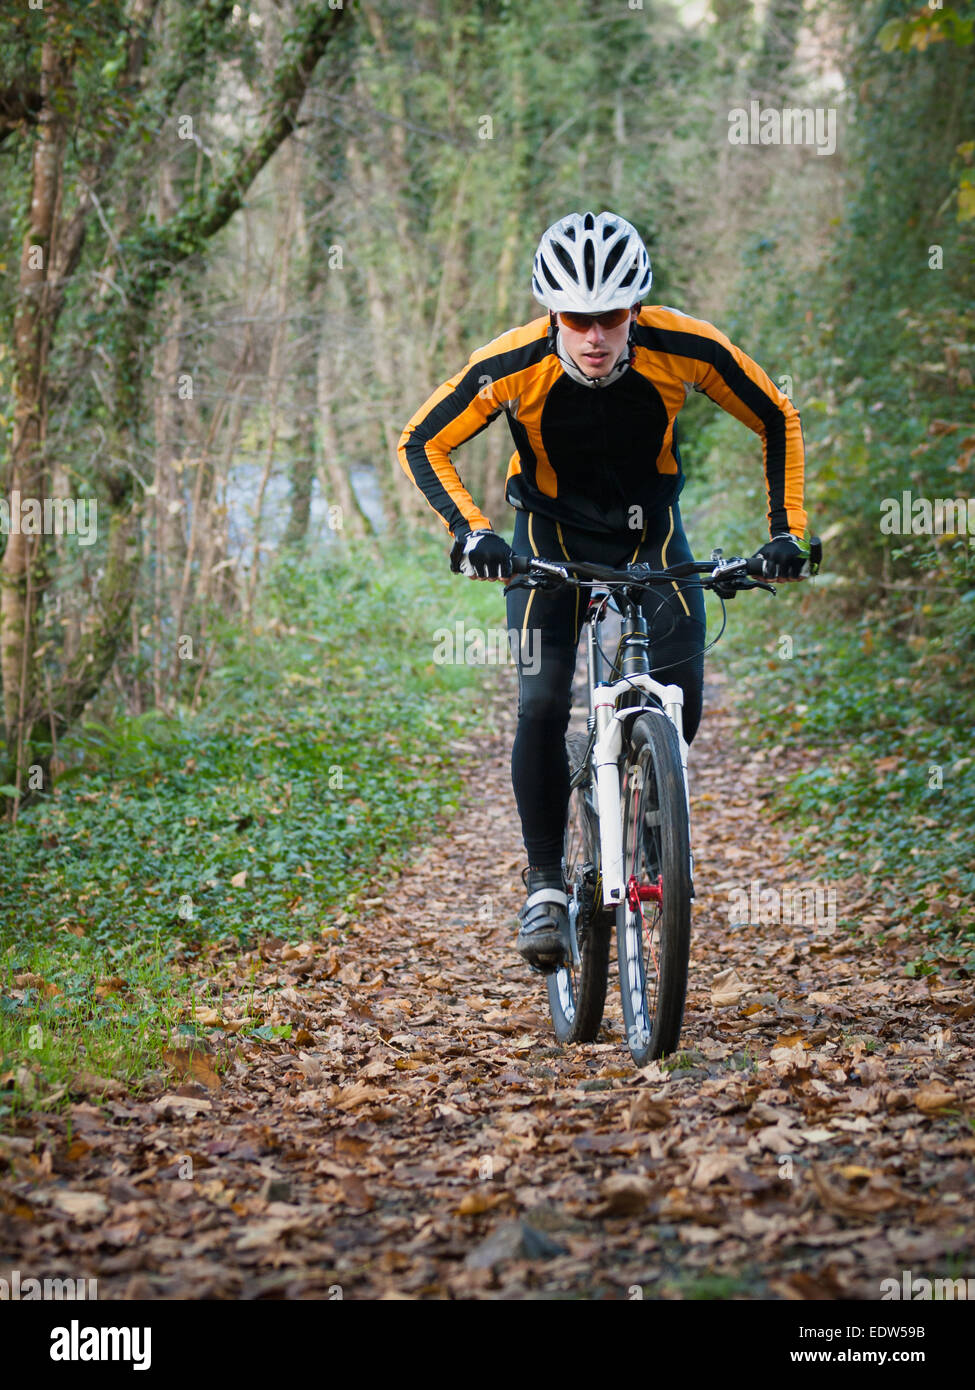 Cyclist on a mountain bike riding in the forest outdoors. Stock Photo